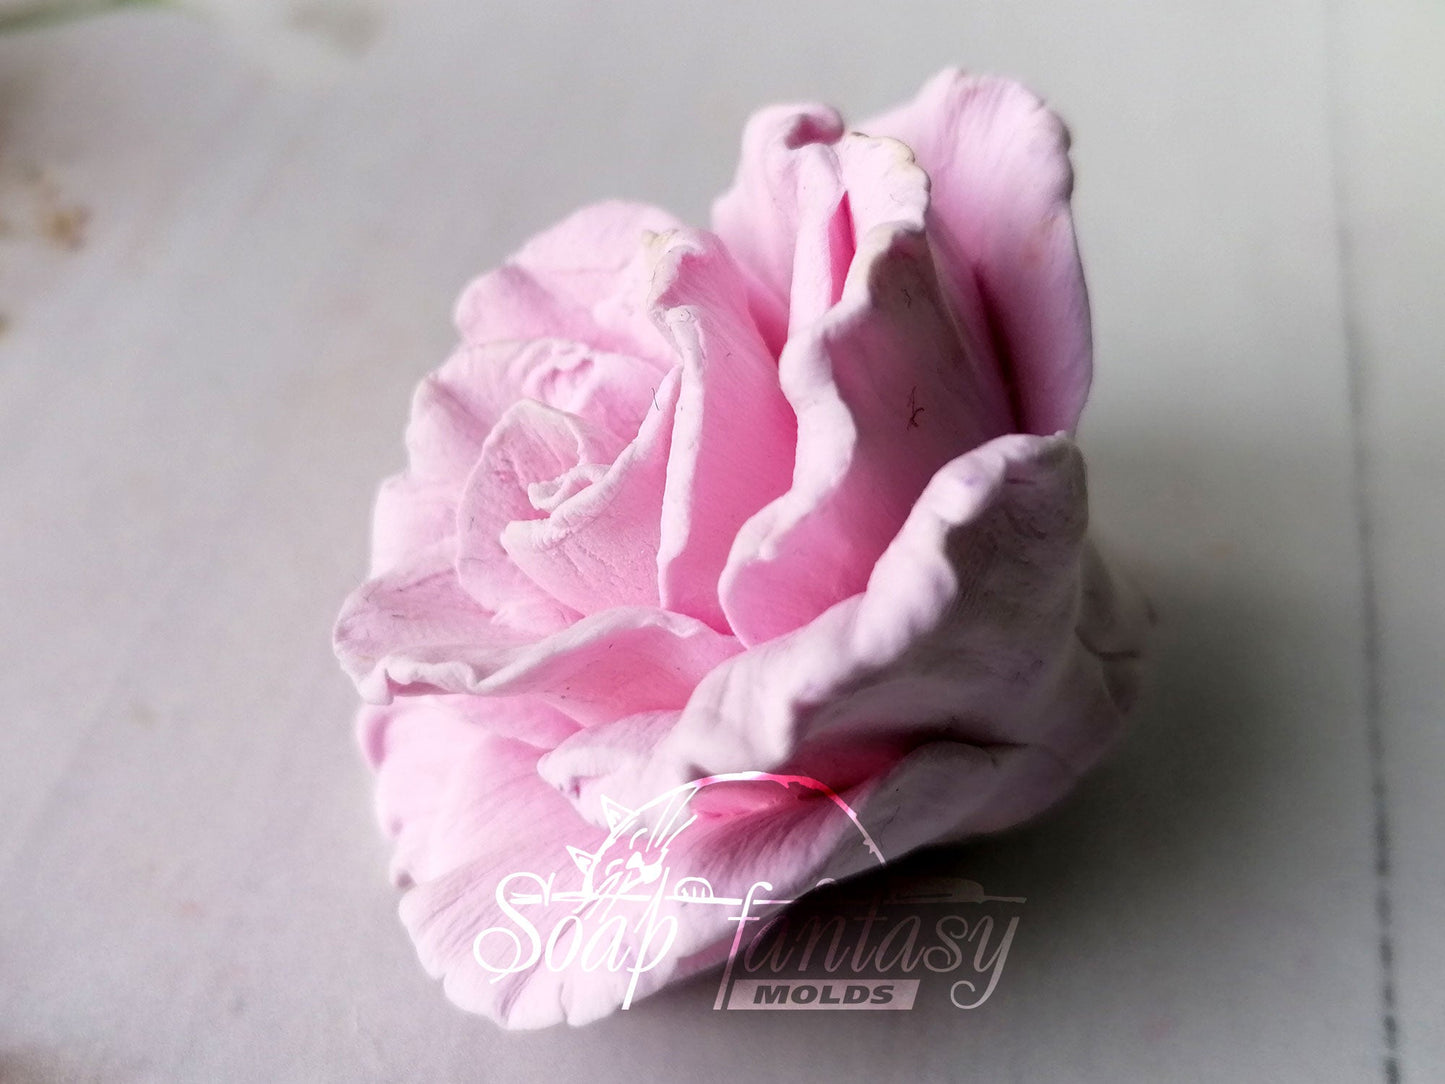 GARAGE SALE >> Carnation flower silicone mold for soap making